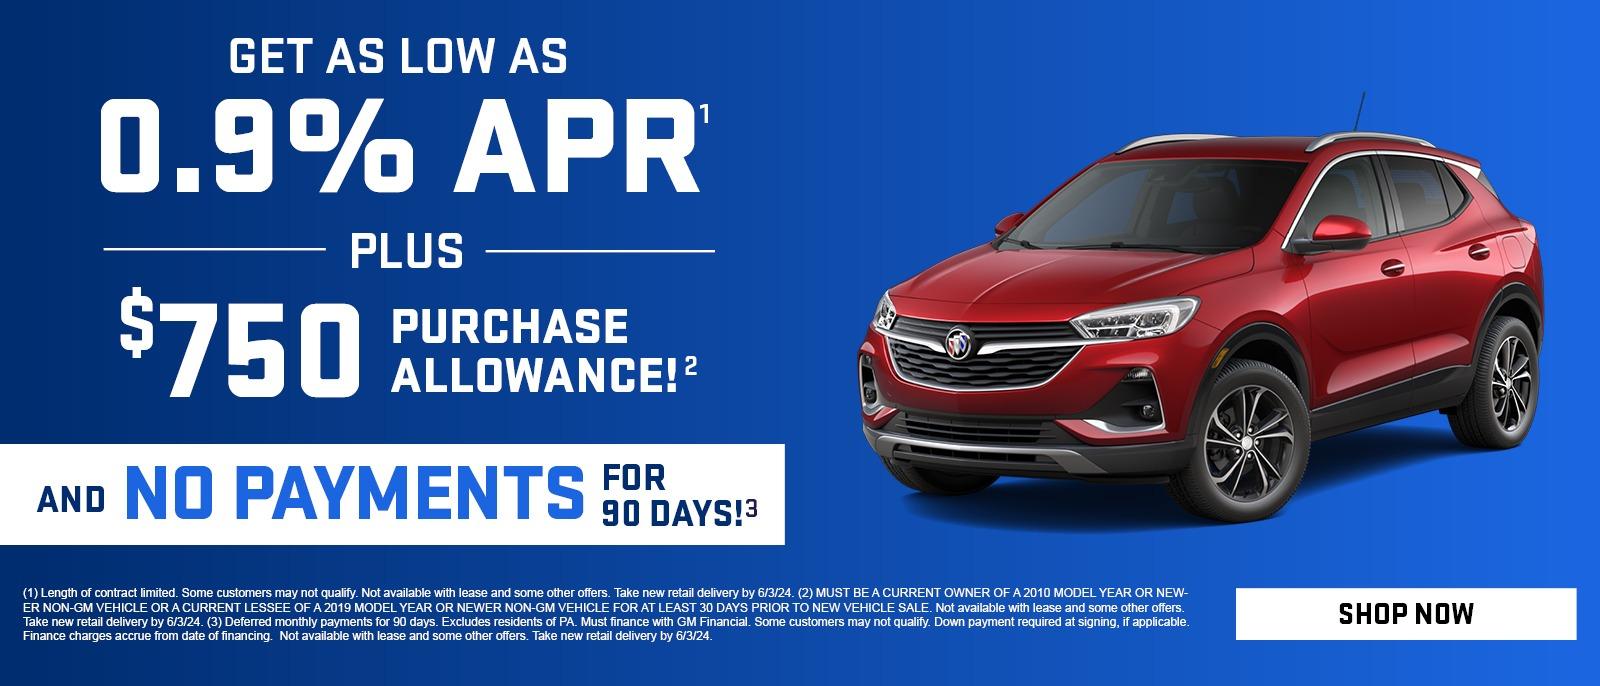 Get as low as
0.9% APR
Plus
$750 purchase allowance!
And No payments for 90 days!